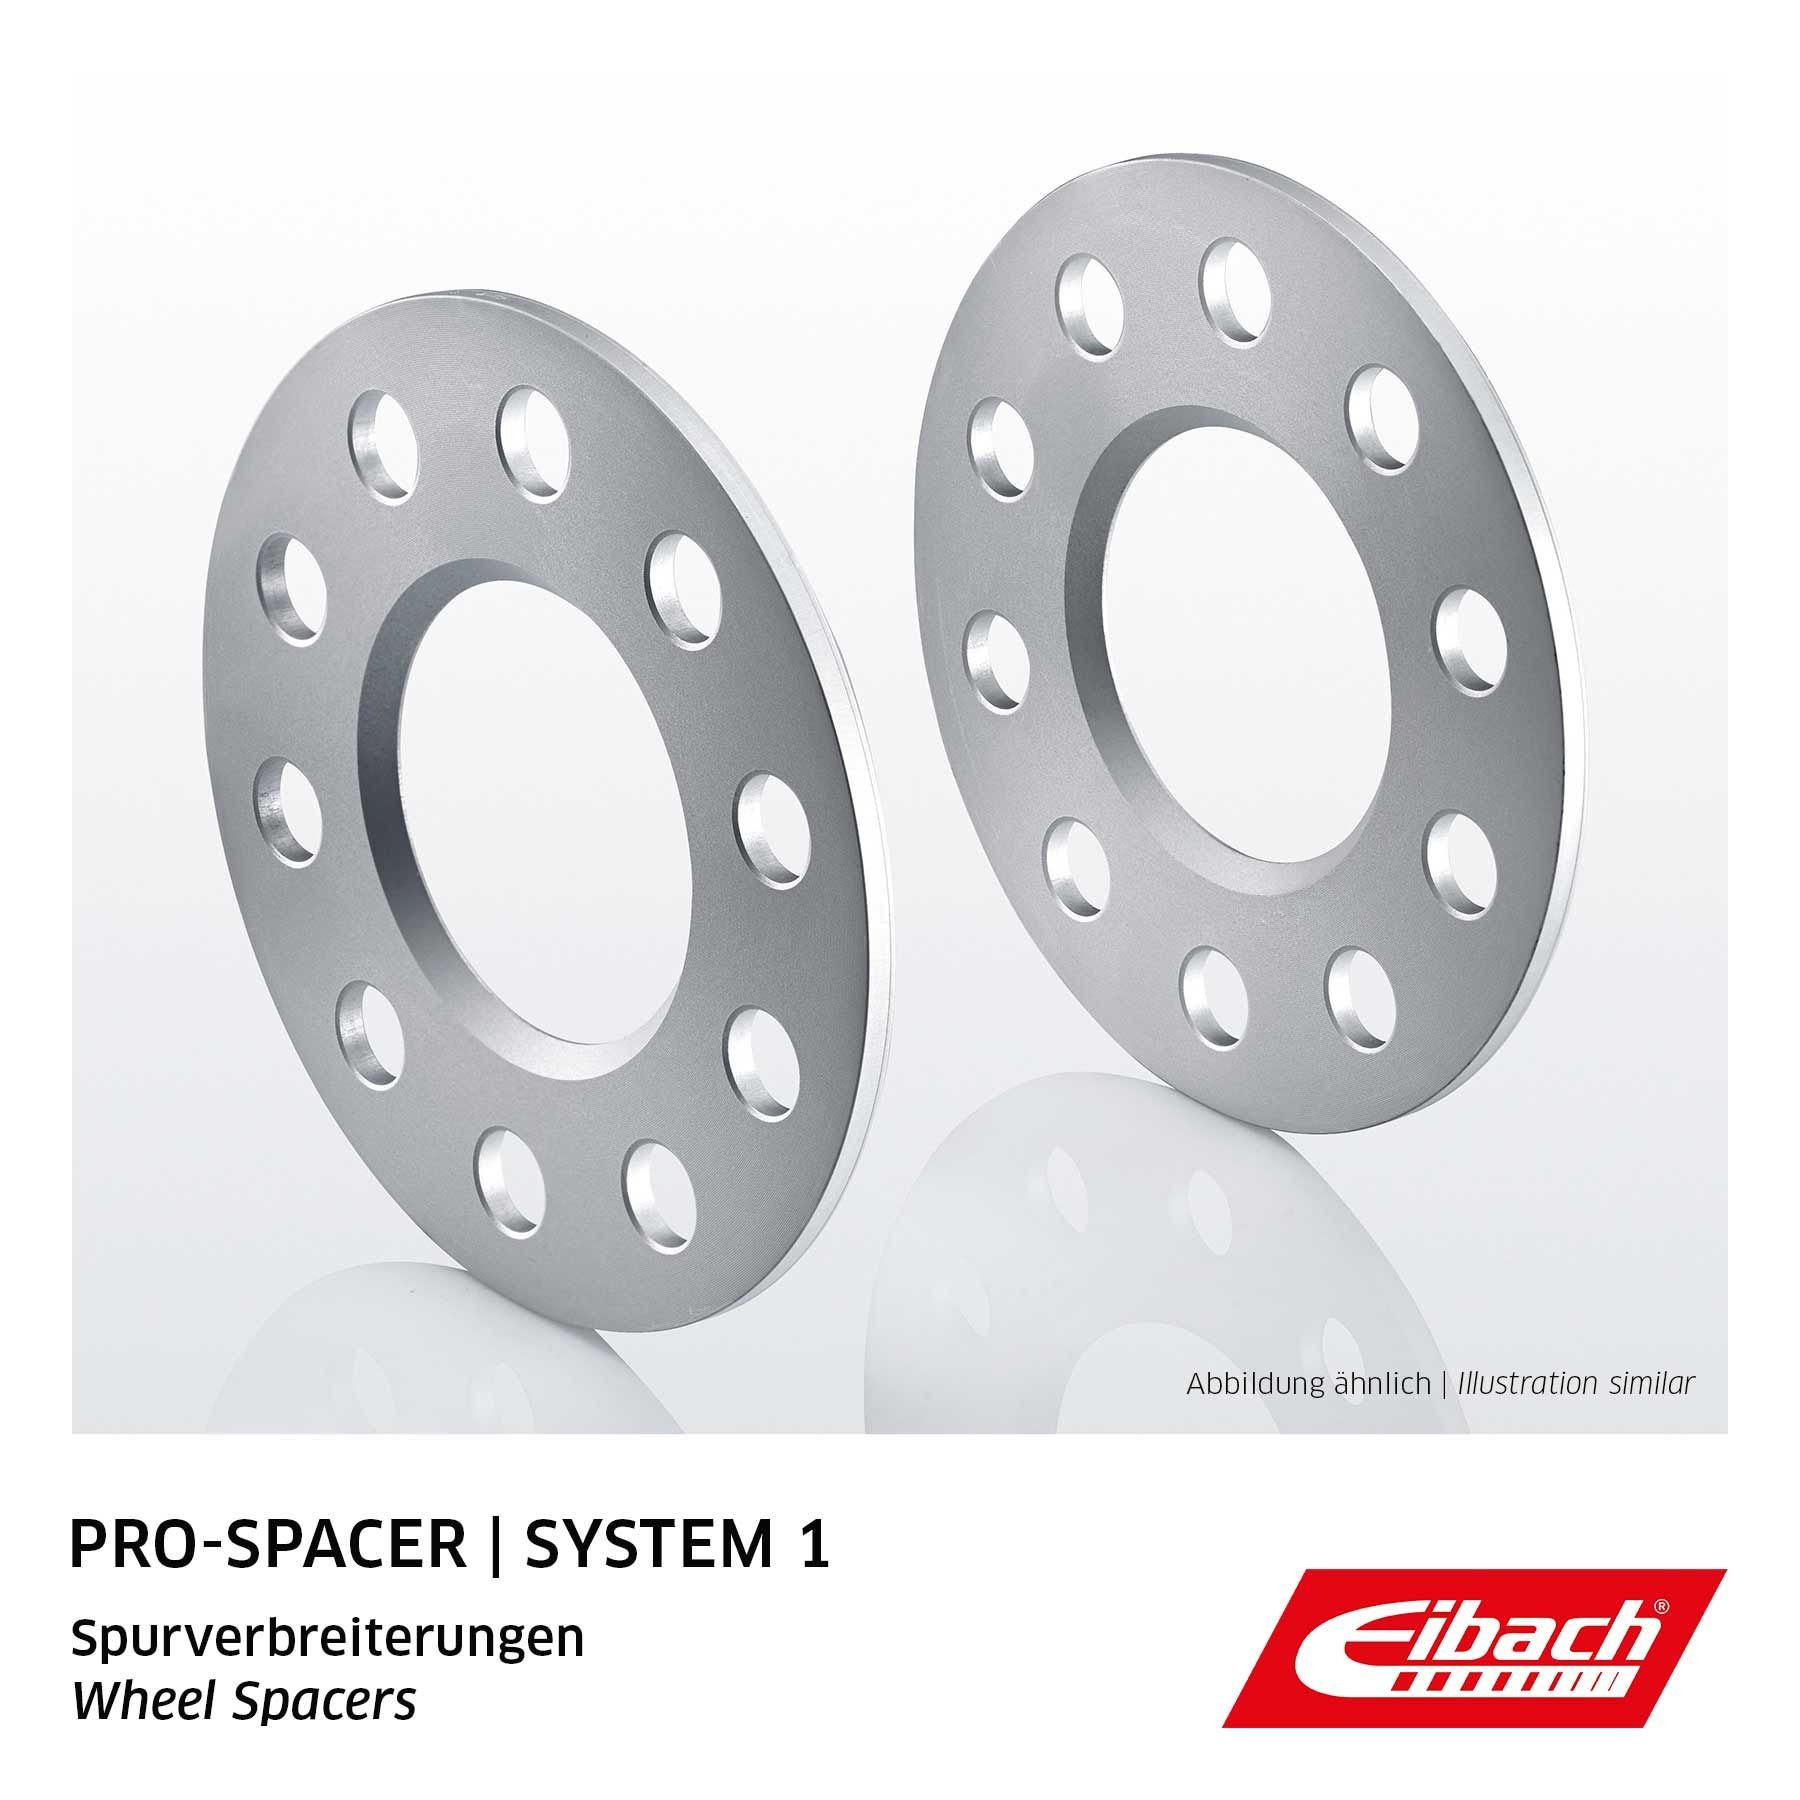 Hub centric wheel spacers EIBACH Pro-Spacer 5x108, 5 mm - S90-1-05-020